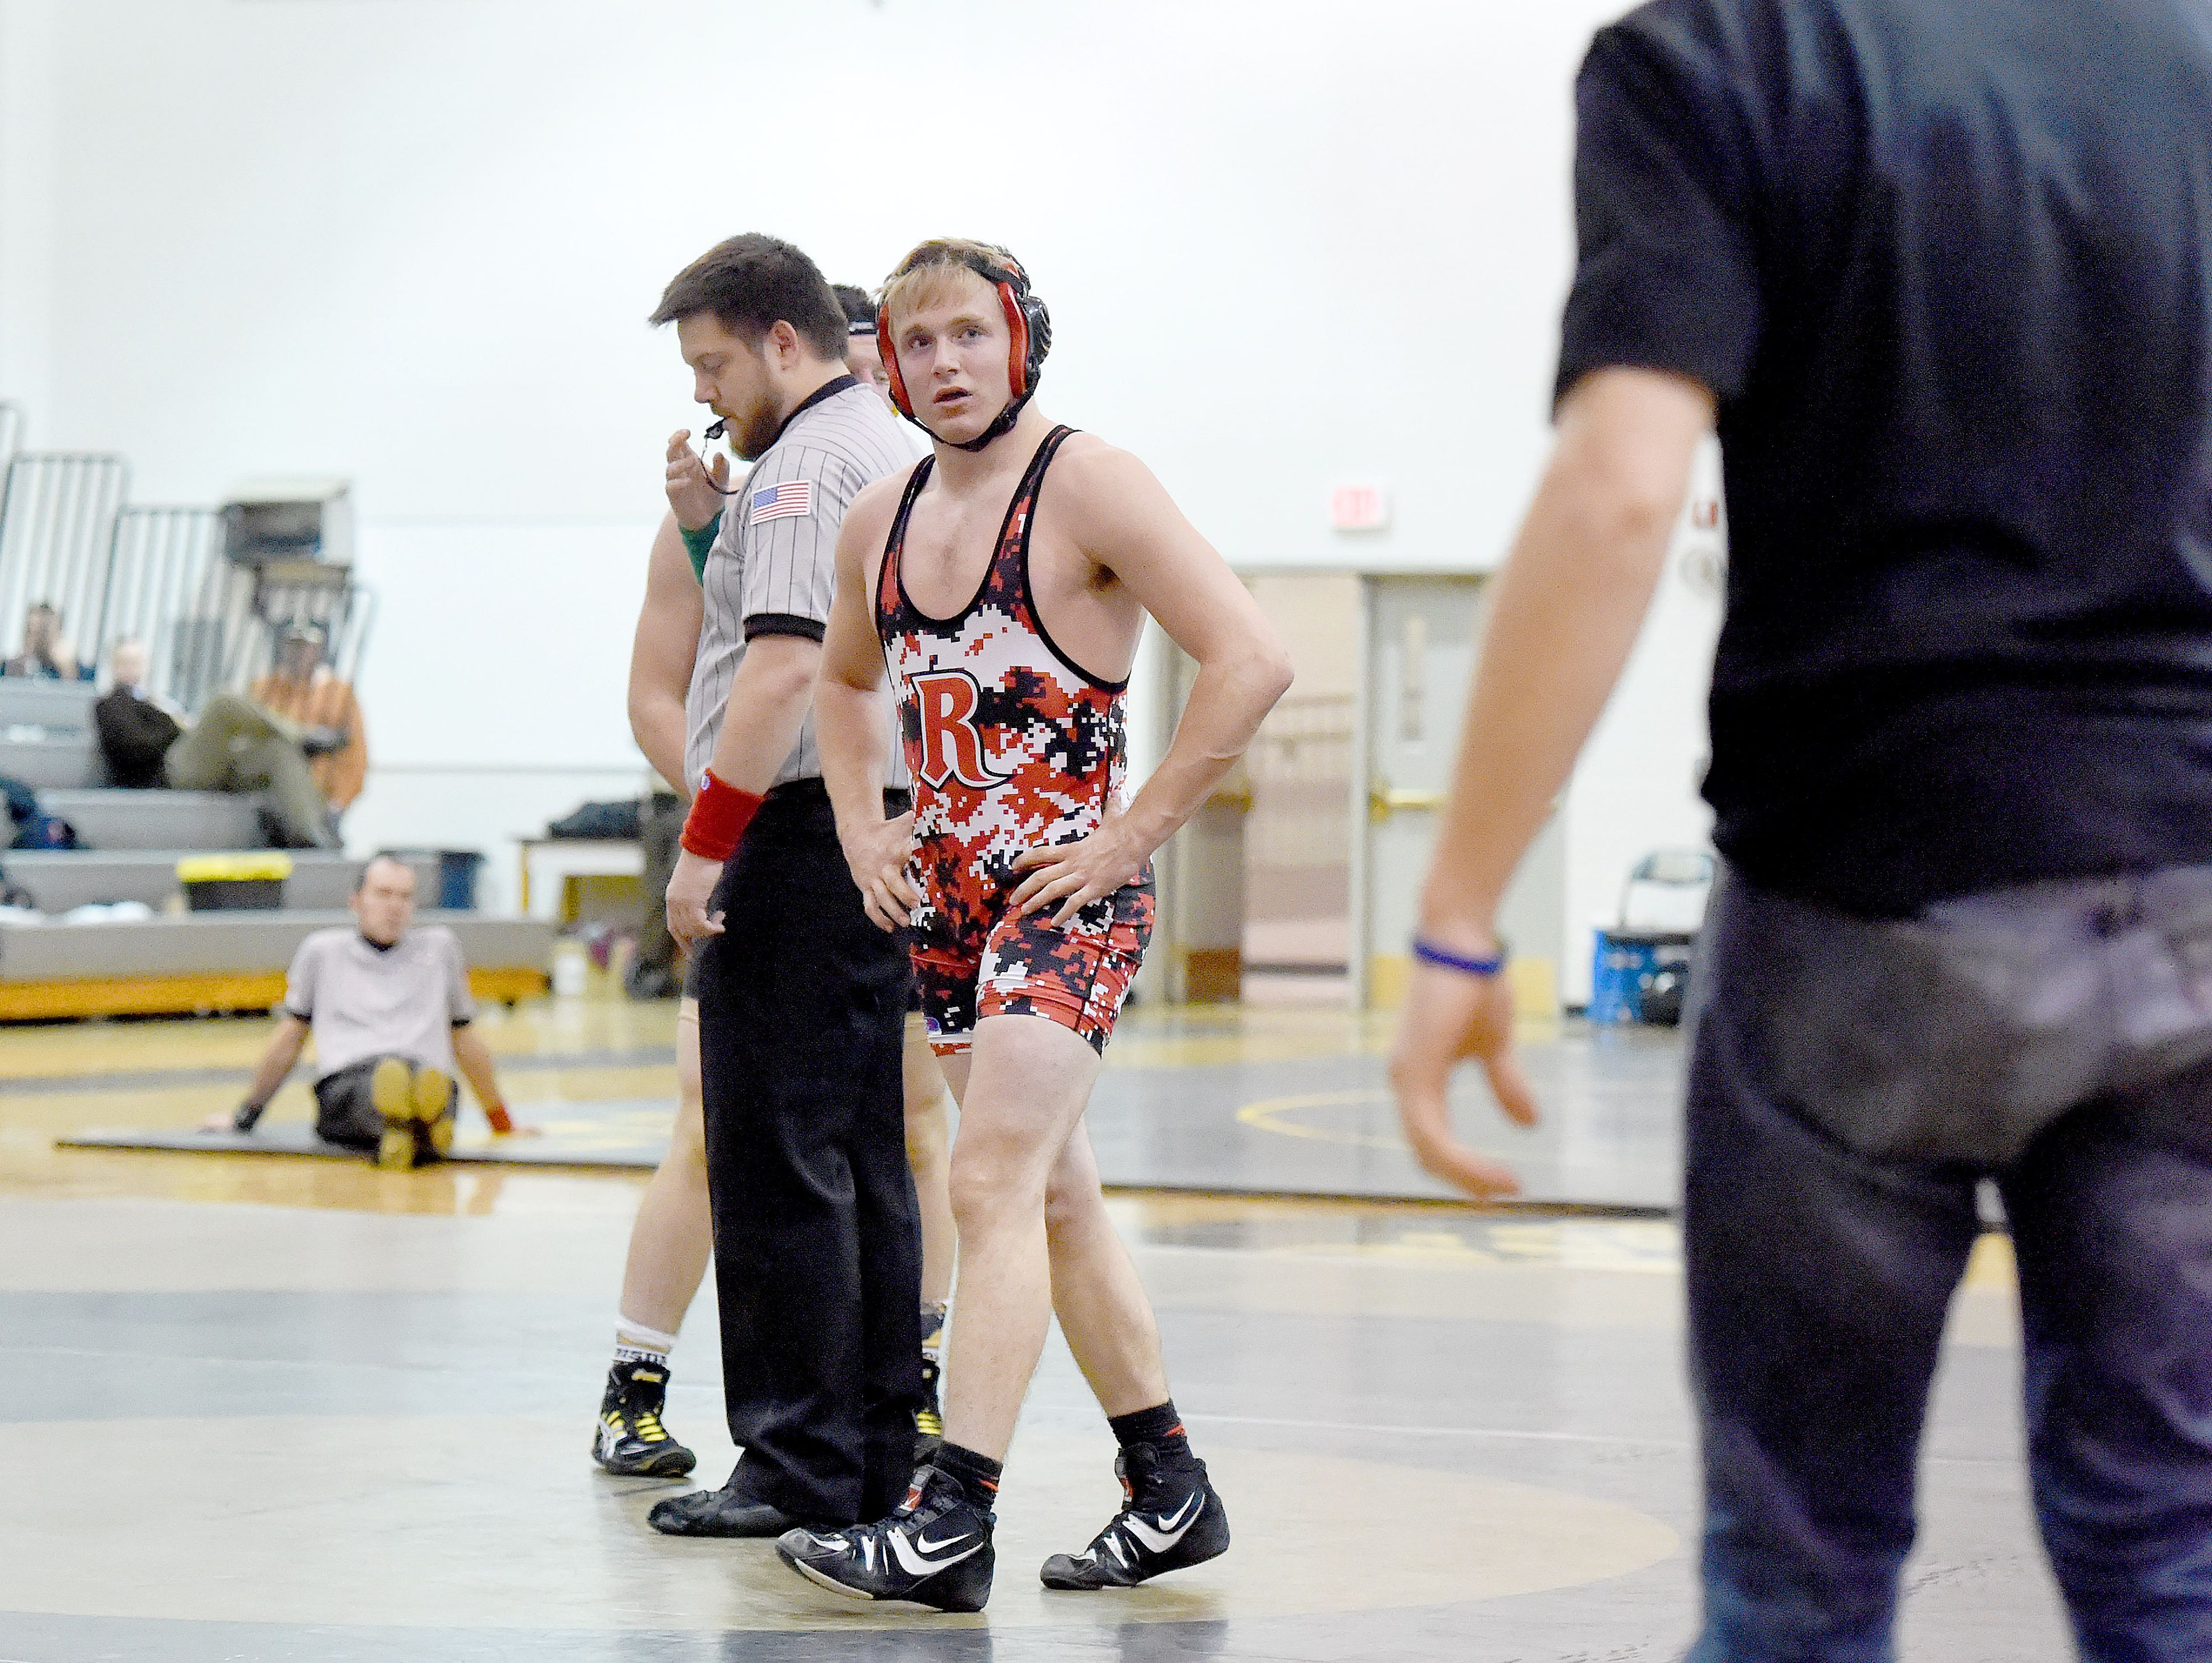 Riverheads' Garret Shultz looks to his coaches during a delay in the action in his 145-pound match against Buffalo Gap's Josh Stagner during the Bison Wrestling Quad in Swoope on Wednesday, Jan. 6, 2016. Martin won the match.